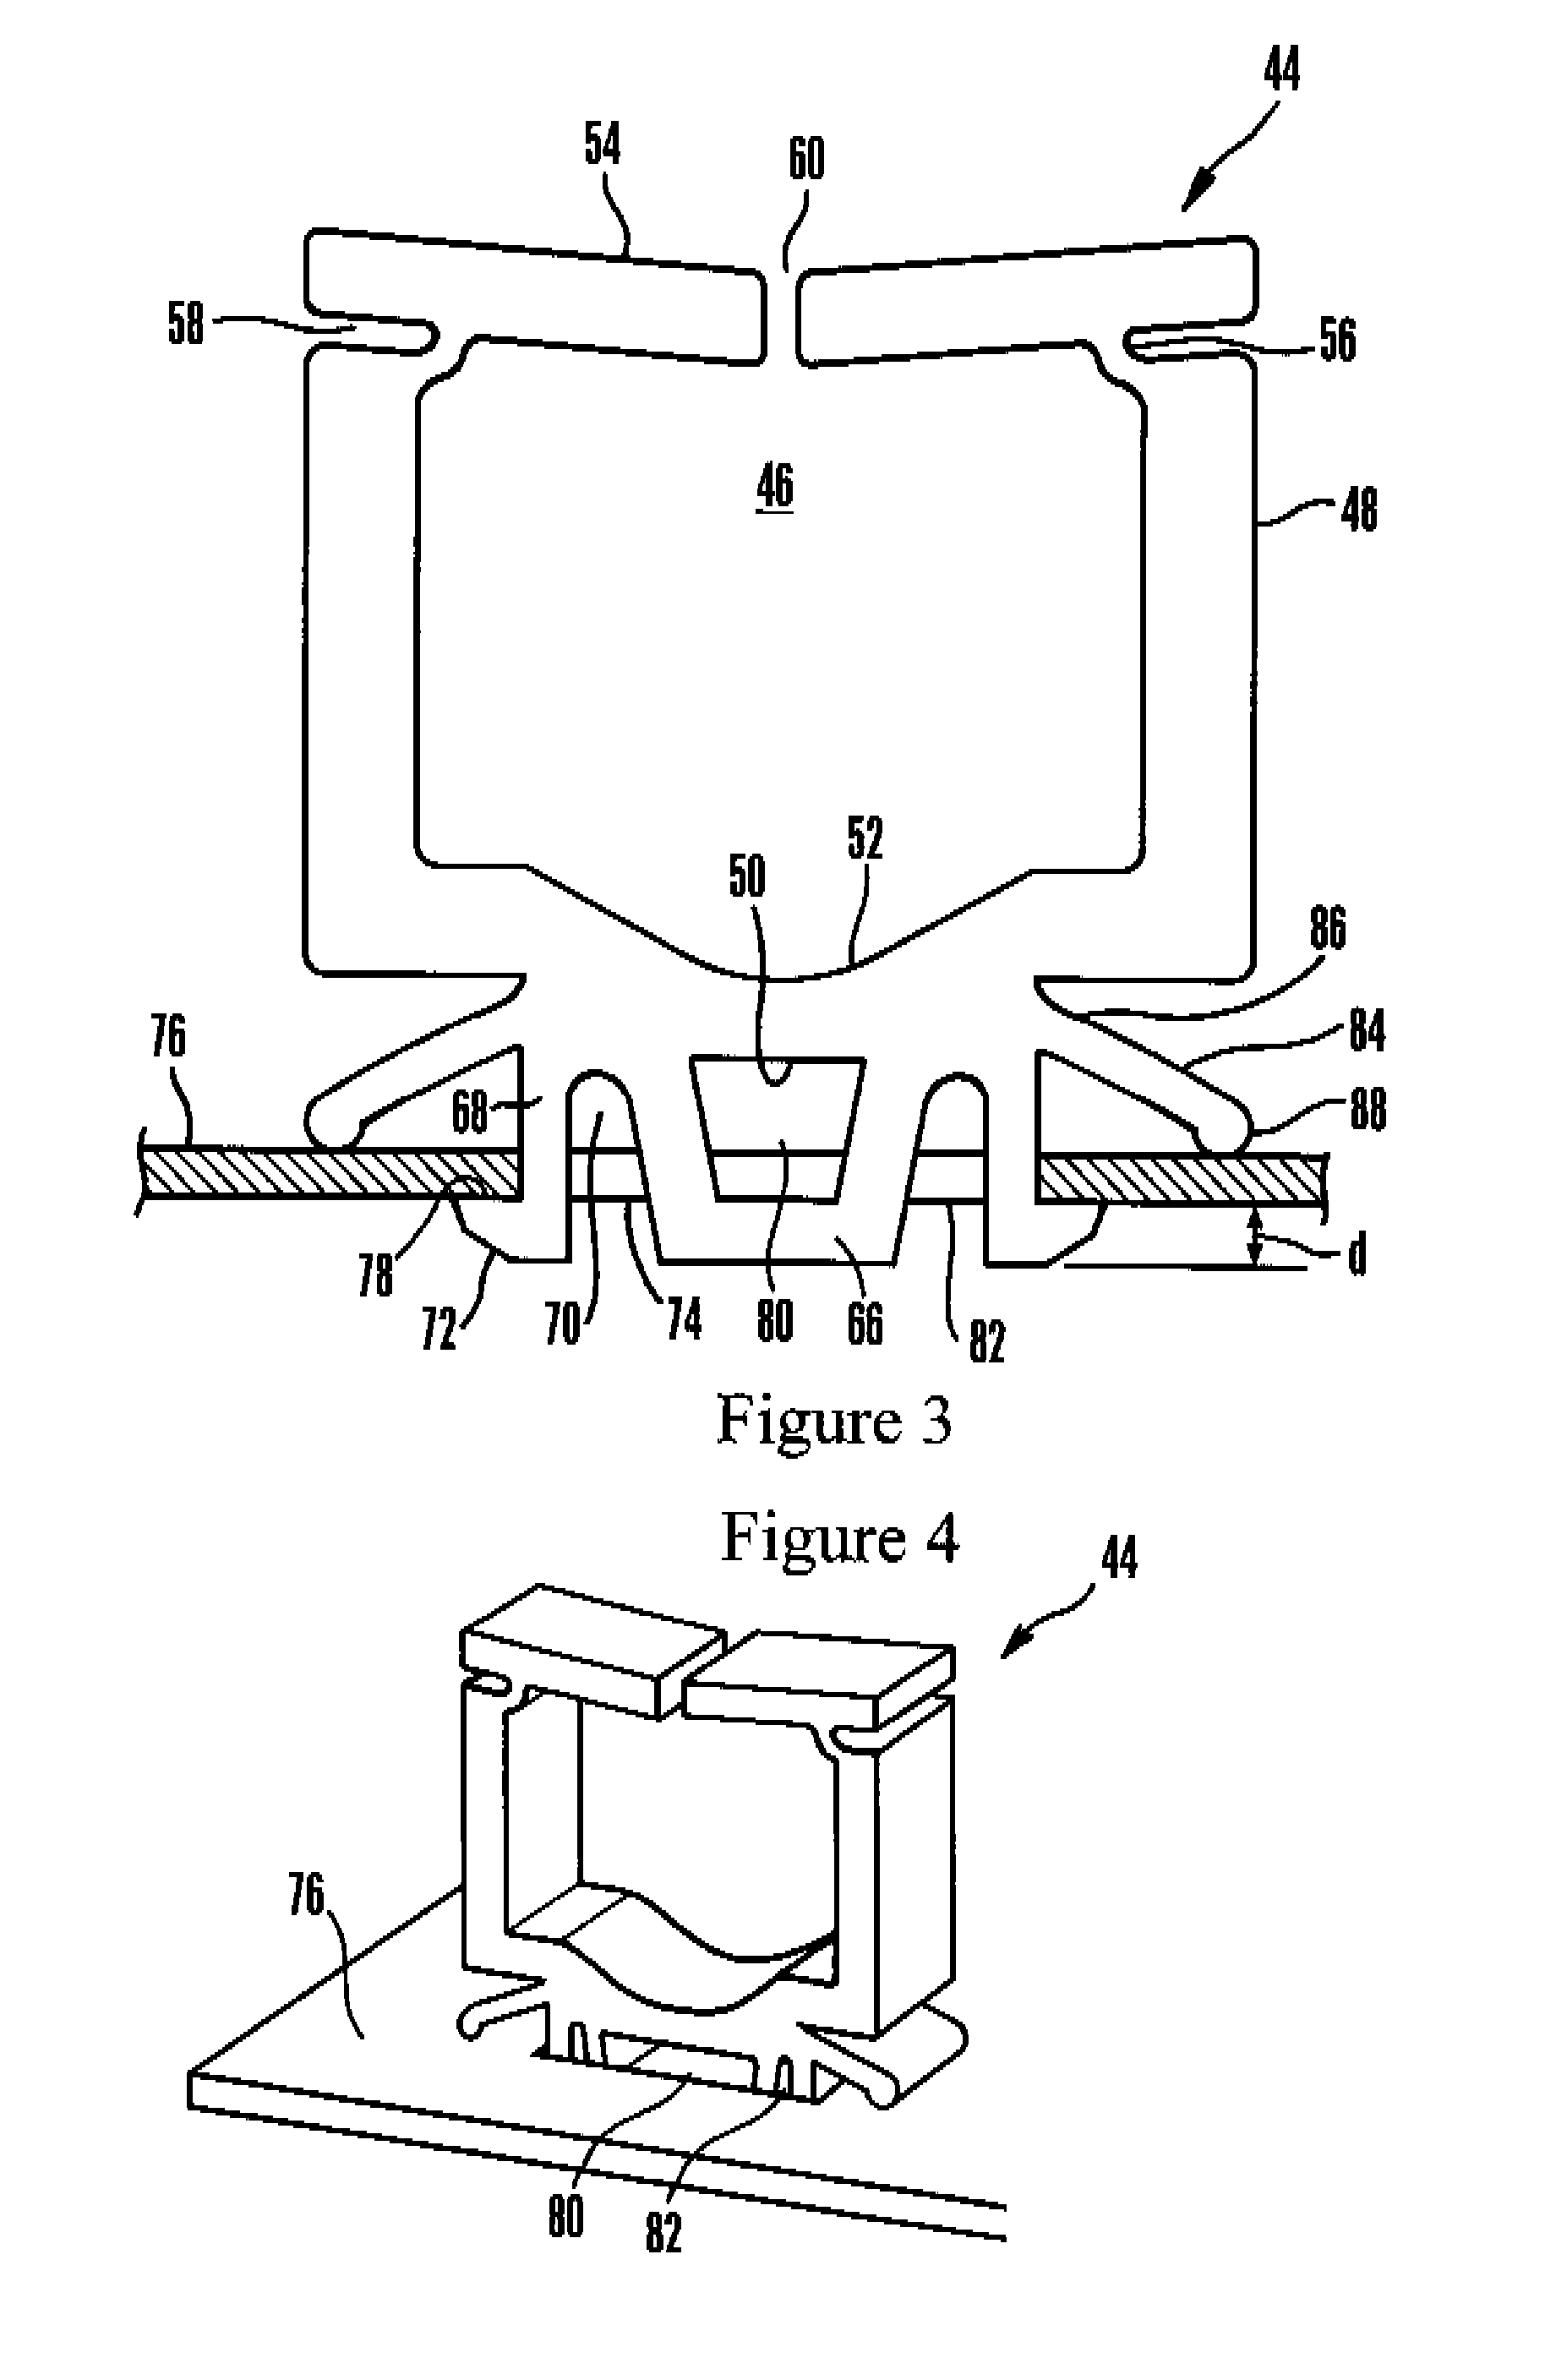 Wire holder with single step installation into T-shaped hole in support substrate